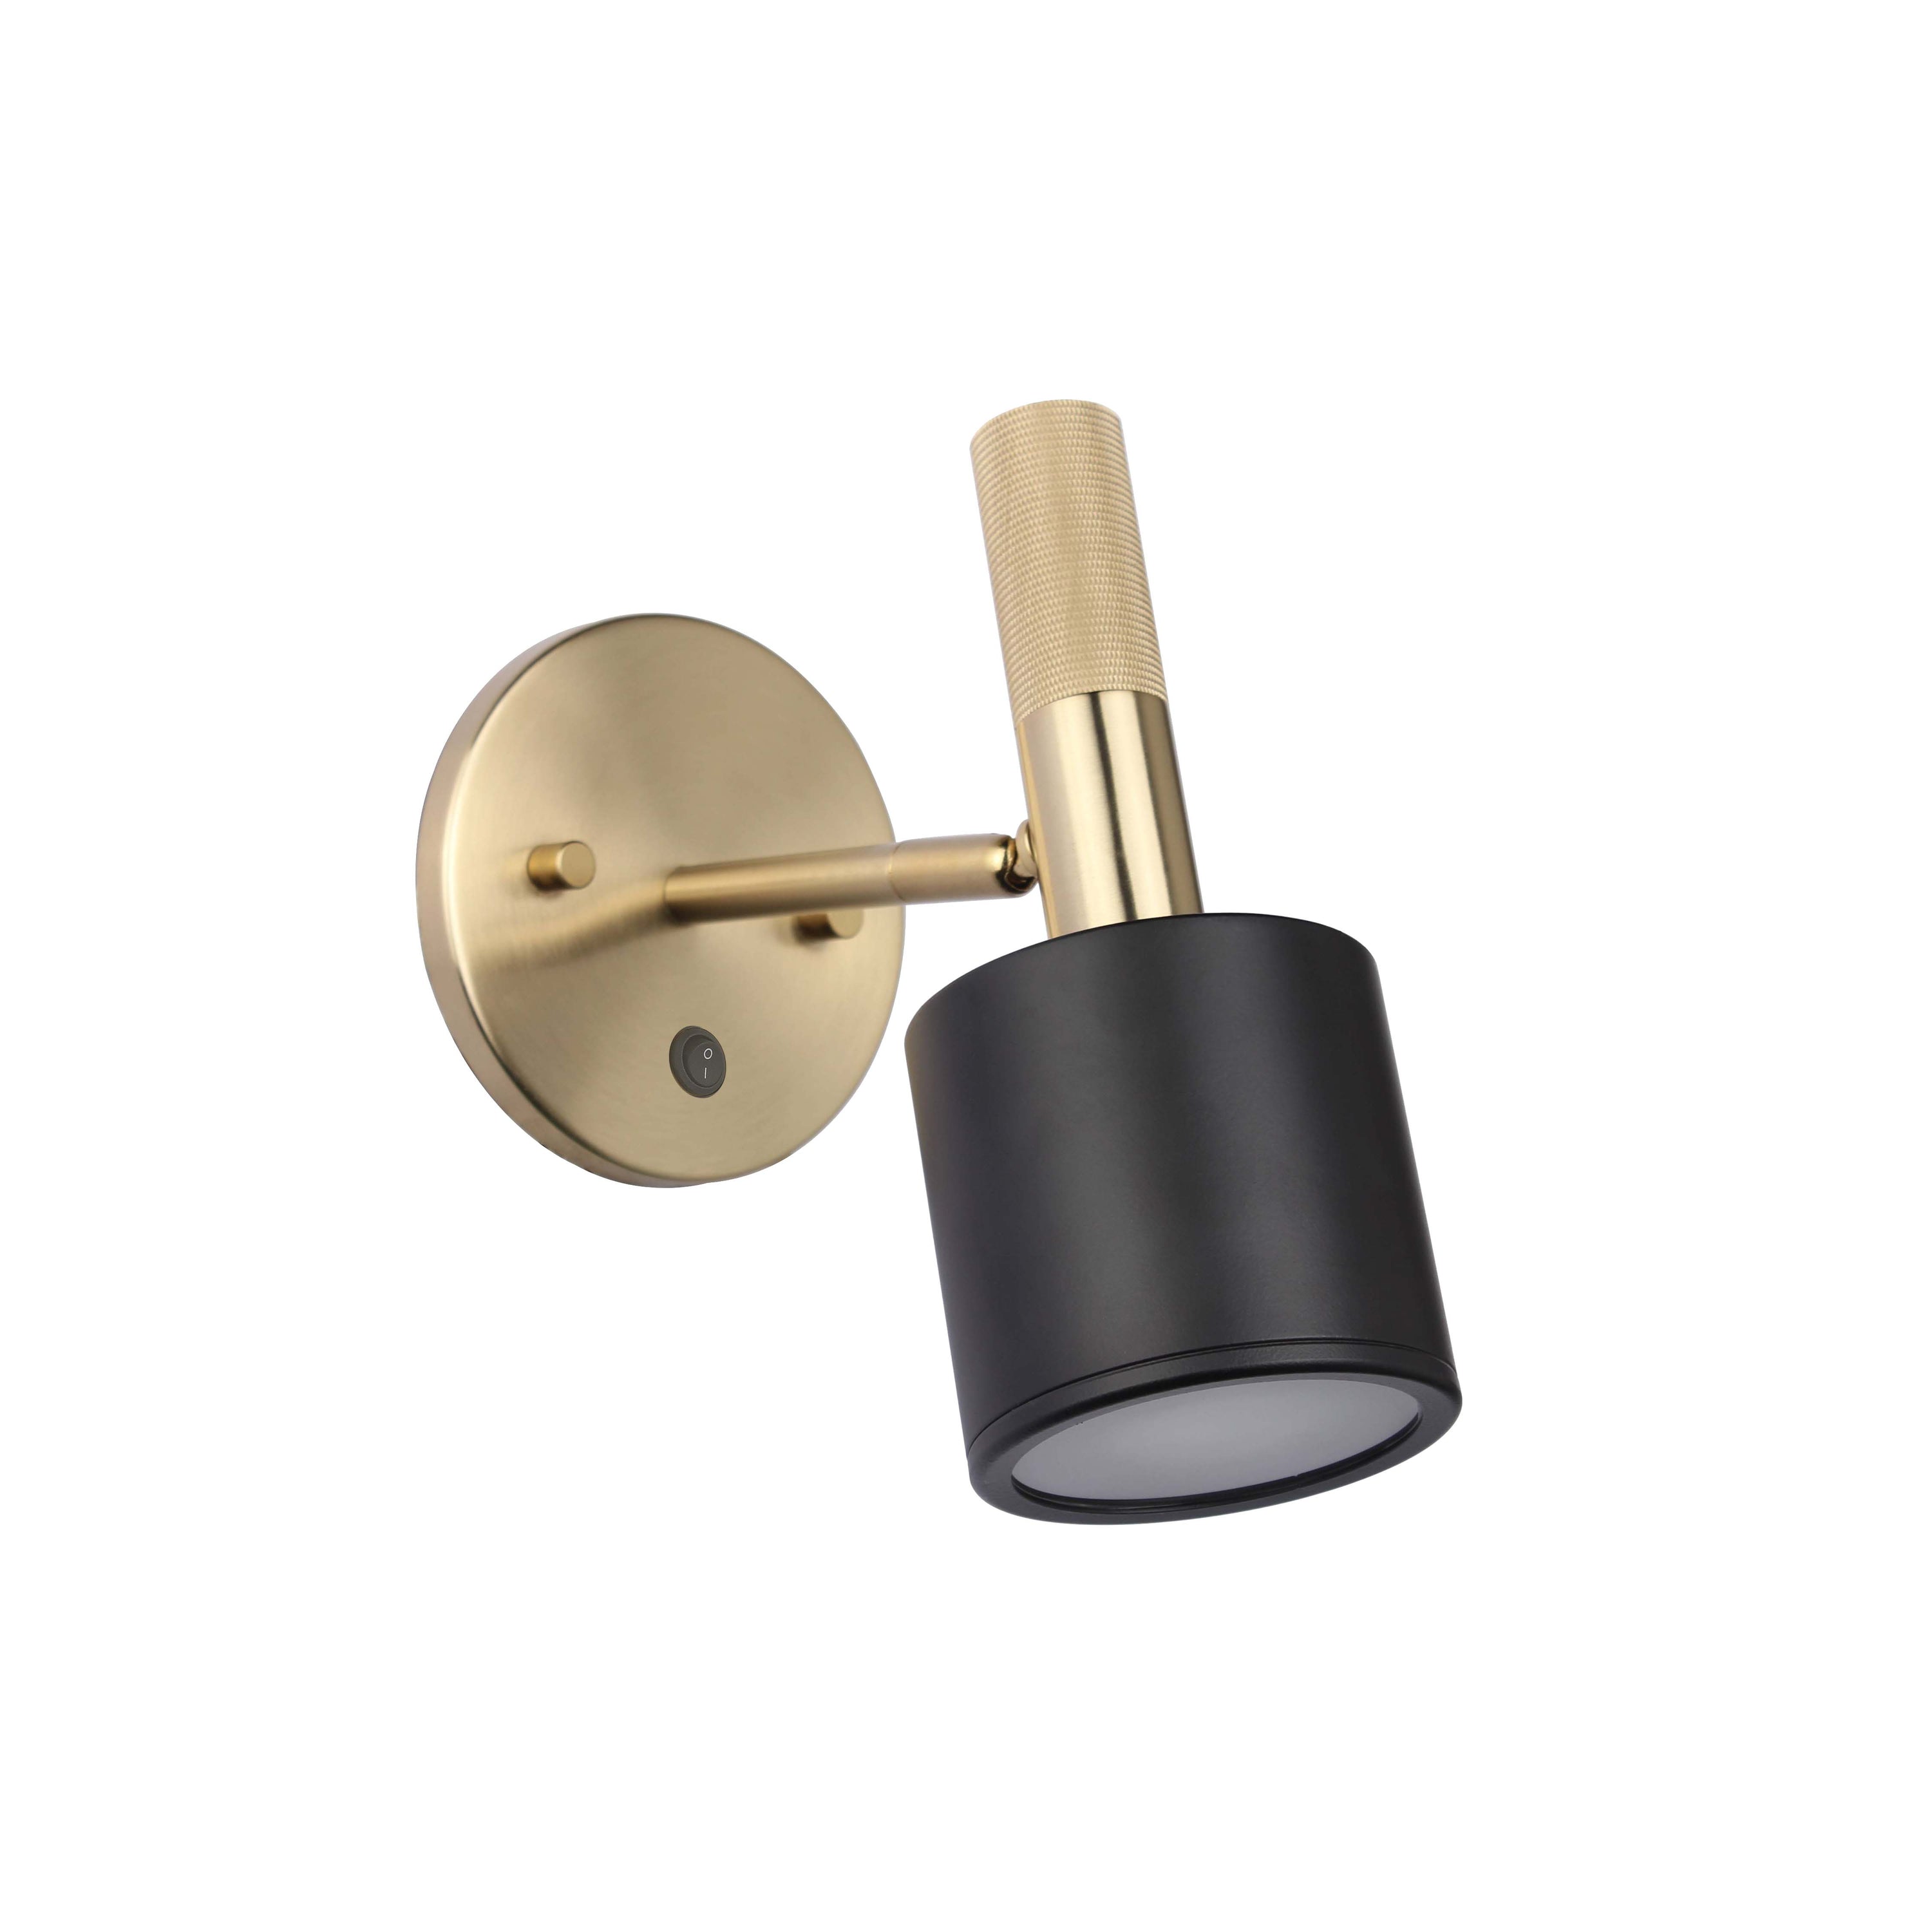 Dainolite RHS-1W-MB-AGB 1 Light Wall Satin Chrome Matte Black & Aged Brass with Frosted Diffuser